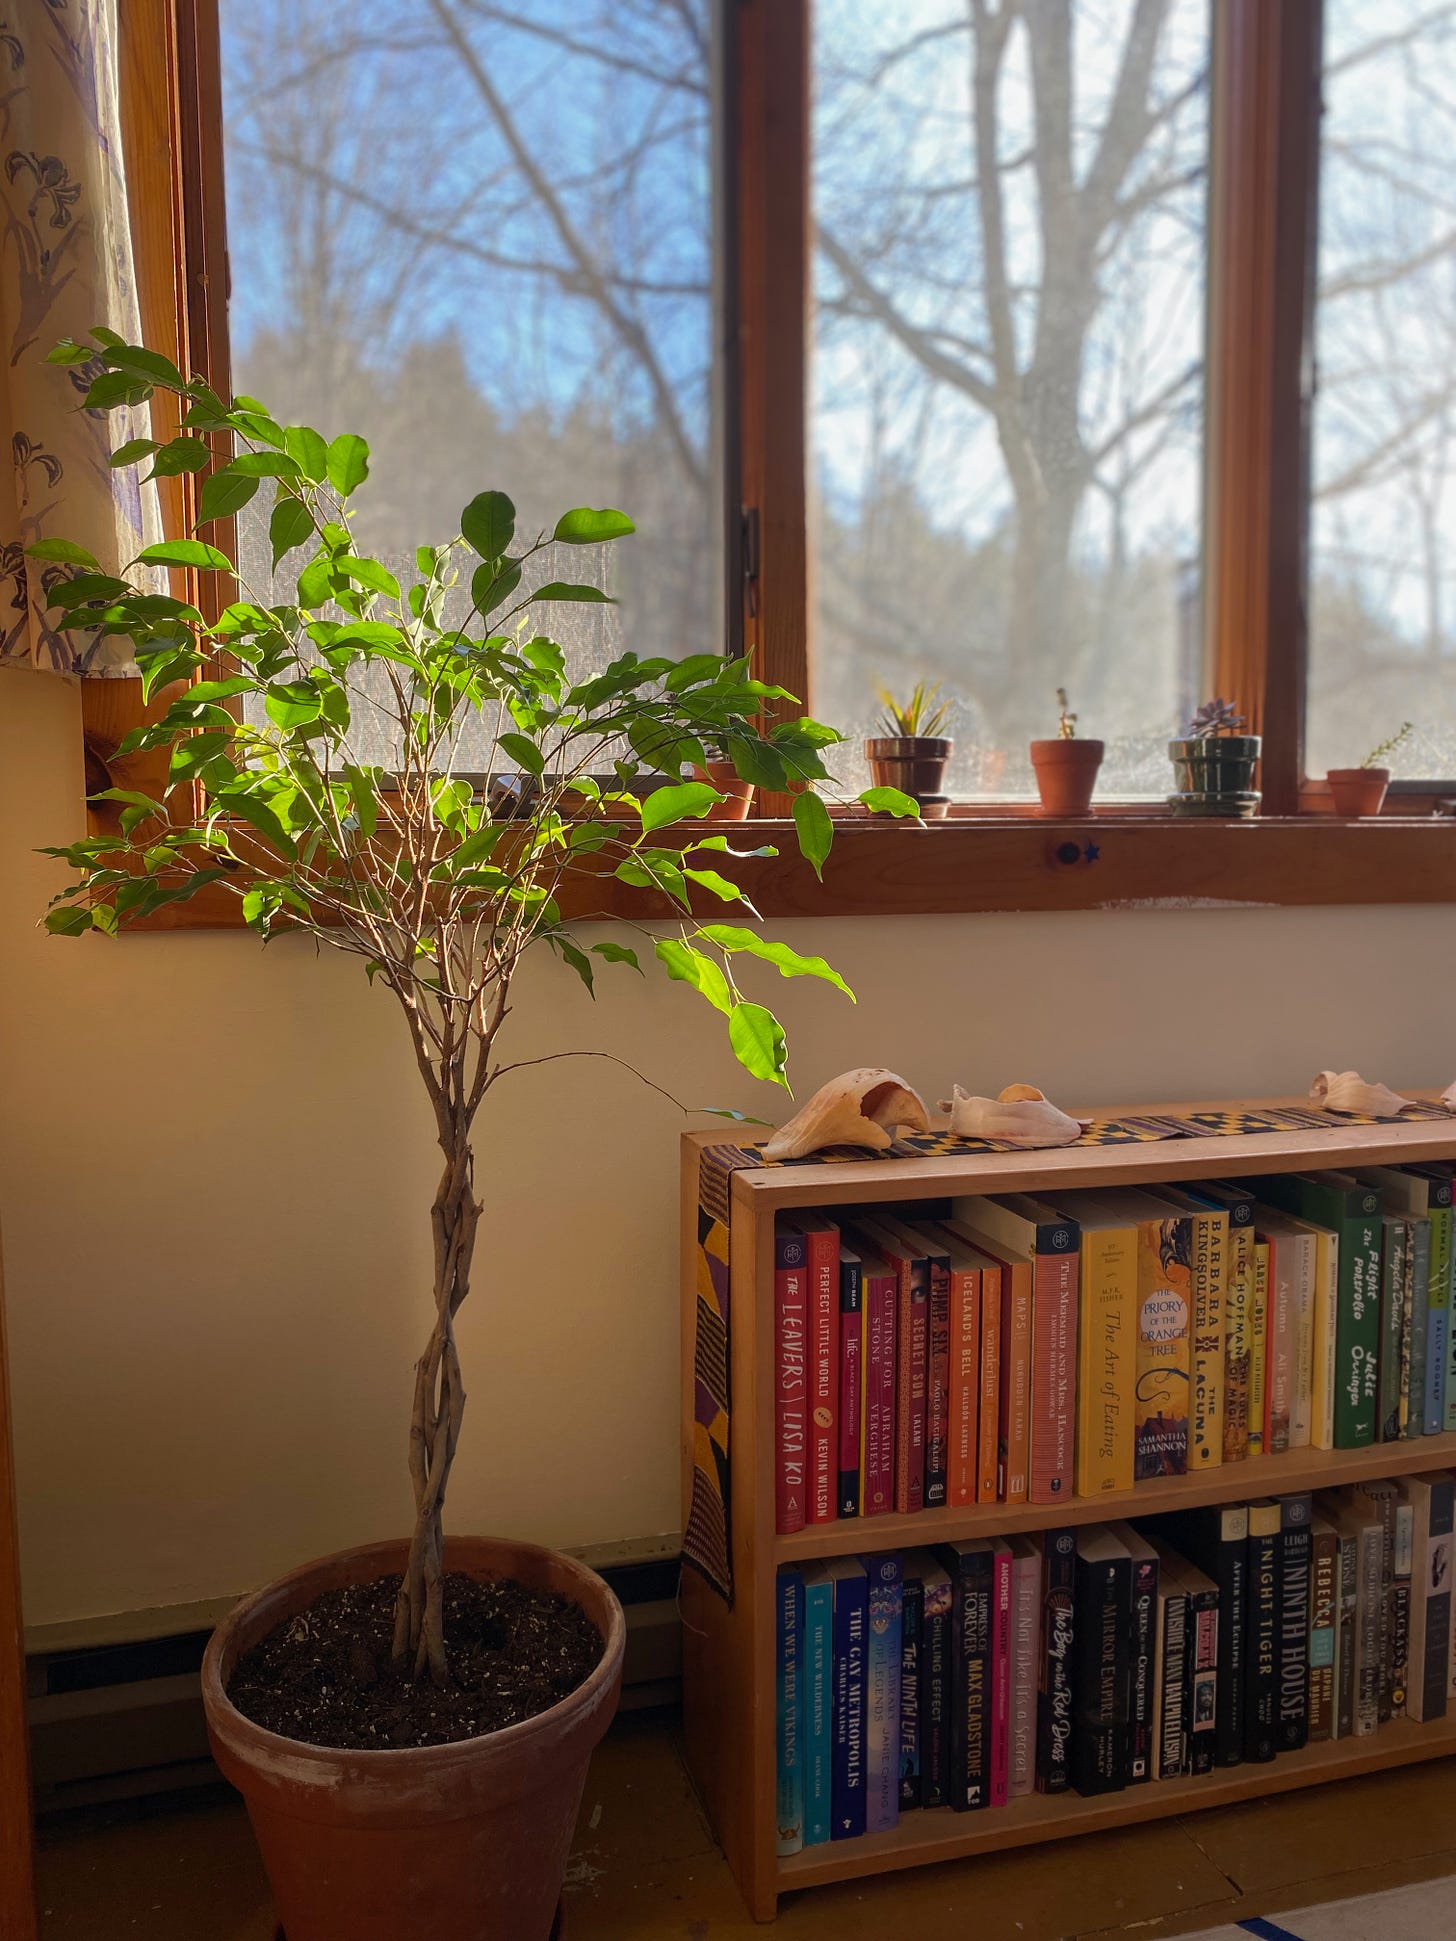 A tall ficus tree with a braided trunk sits in a large terracotta pot under the window, the light reflecting on its leaves. Three small succulents sit on the windowsill. Below the window is a low bookcase filled with rainbow colored books, with several broken conch shells arranged on top. The sky outside is blue with streaks of cloud, with a view of bare tree branches.